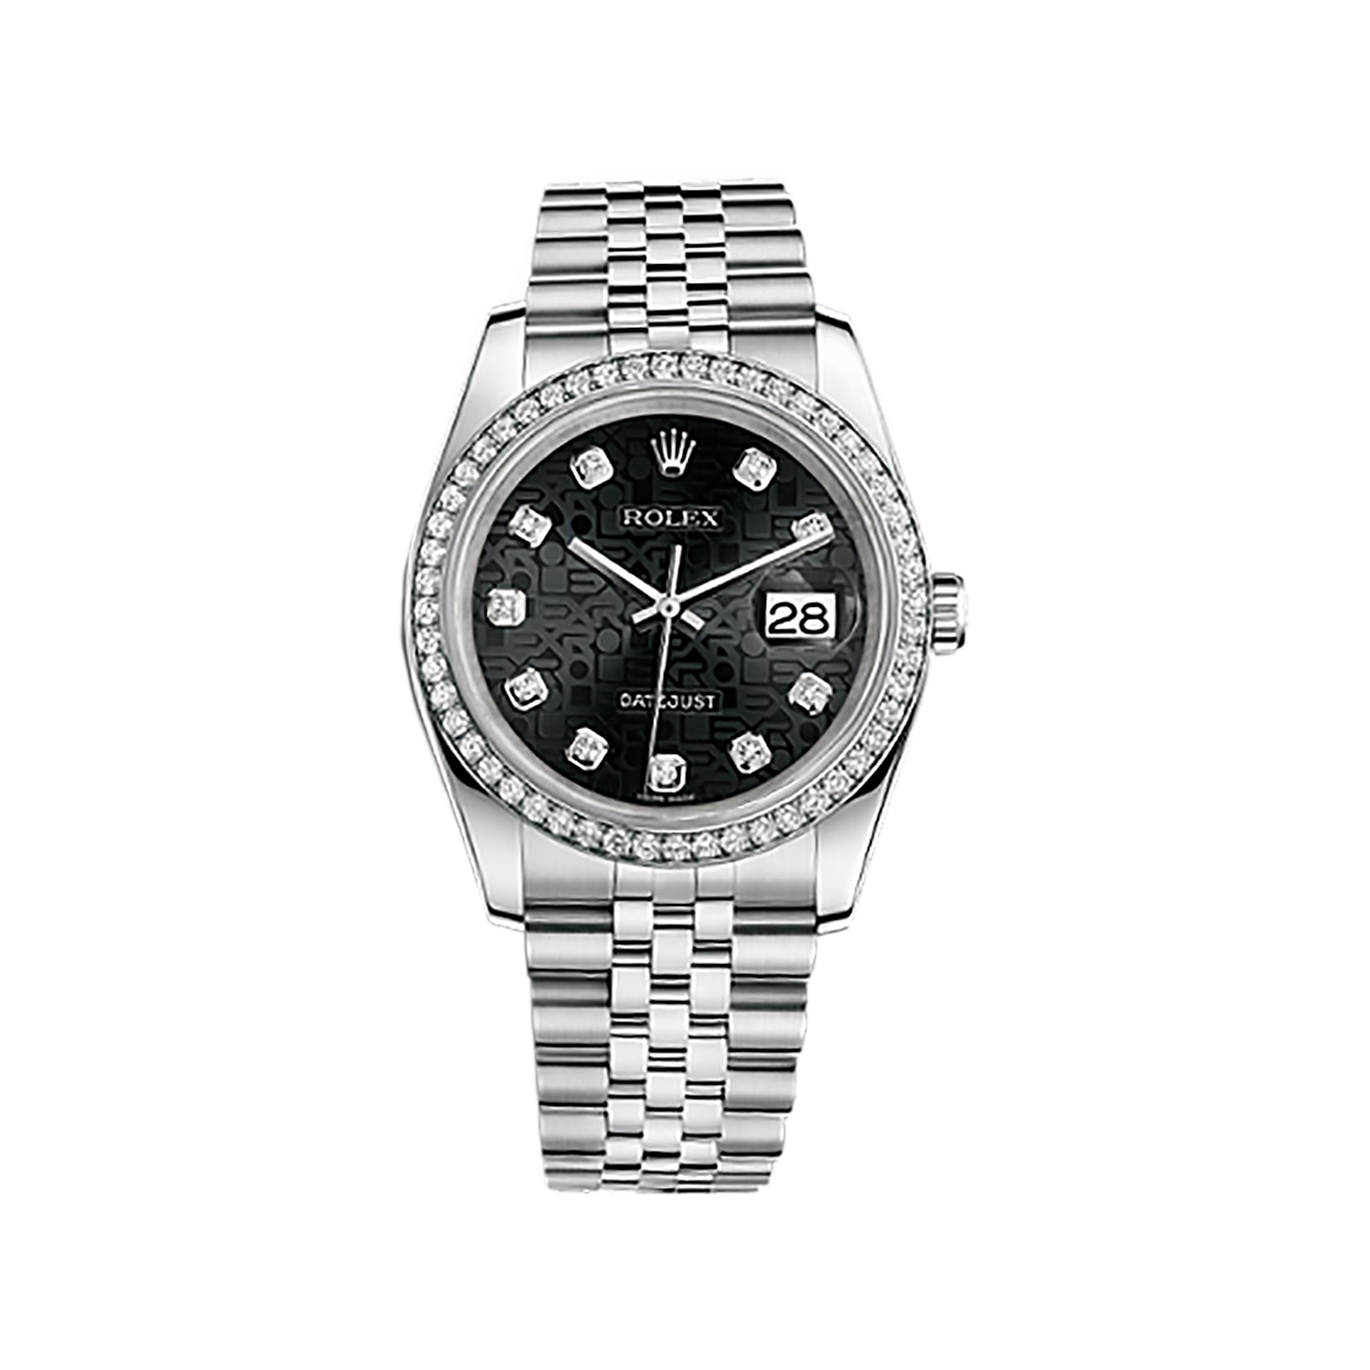 Datejust 36 116244 White Gold & Stainless Steel Watch (Black Jubilee Design Set with Diamonds)